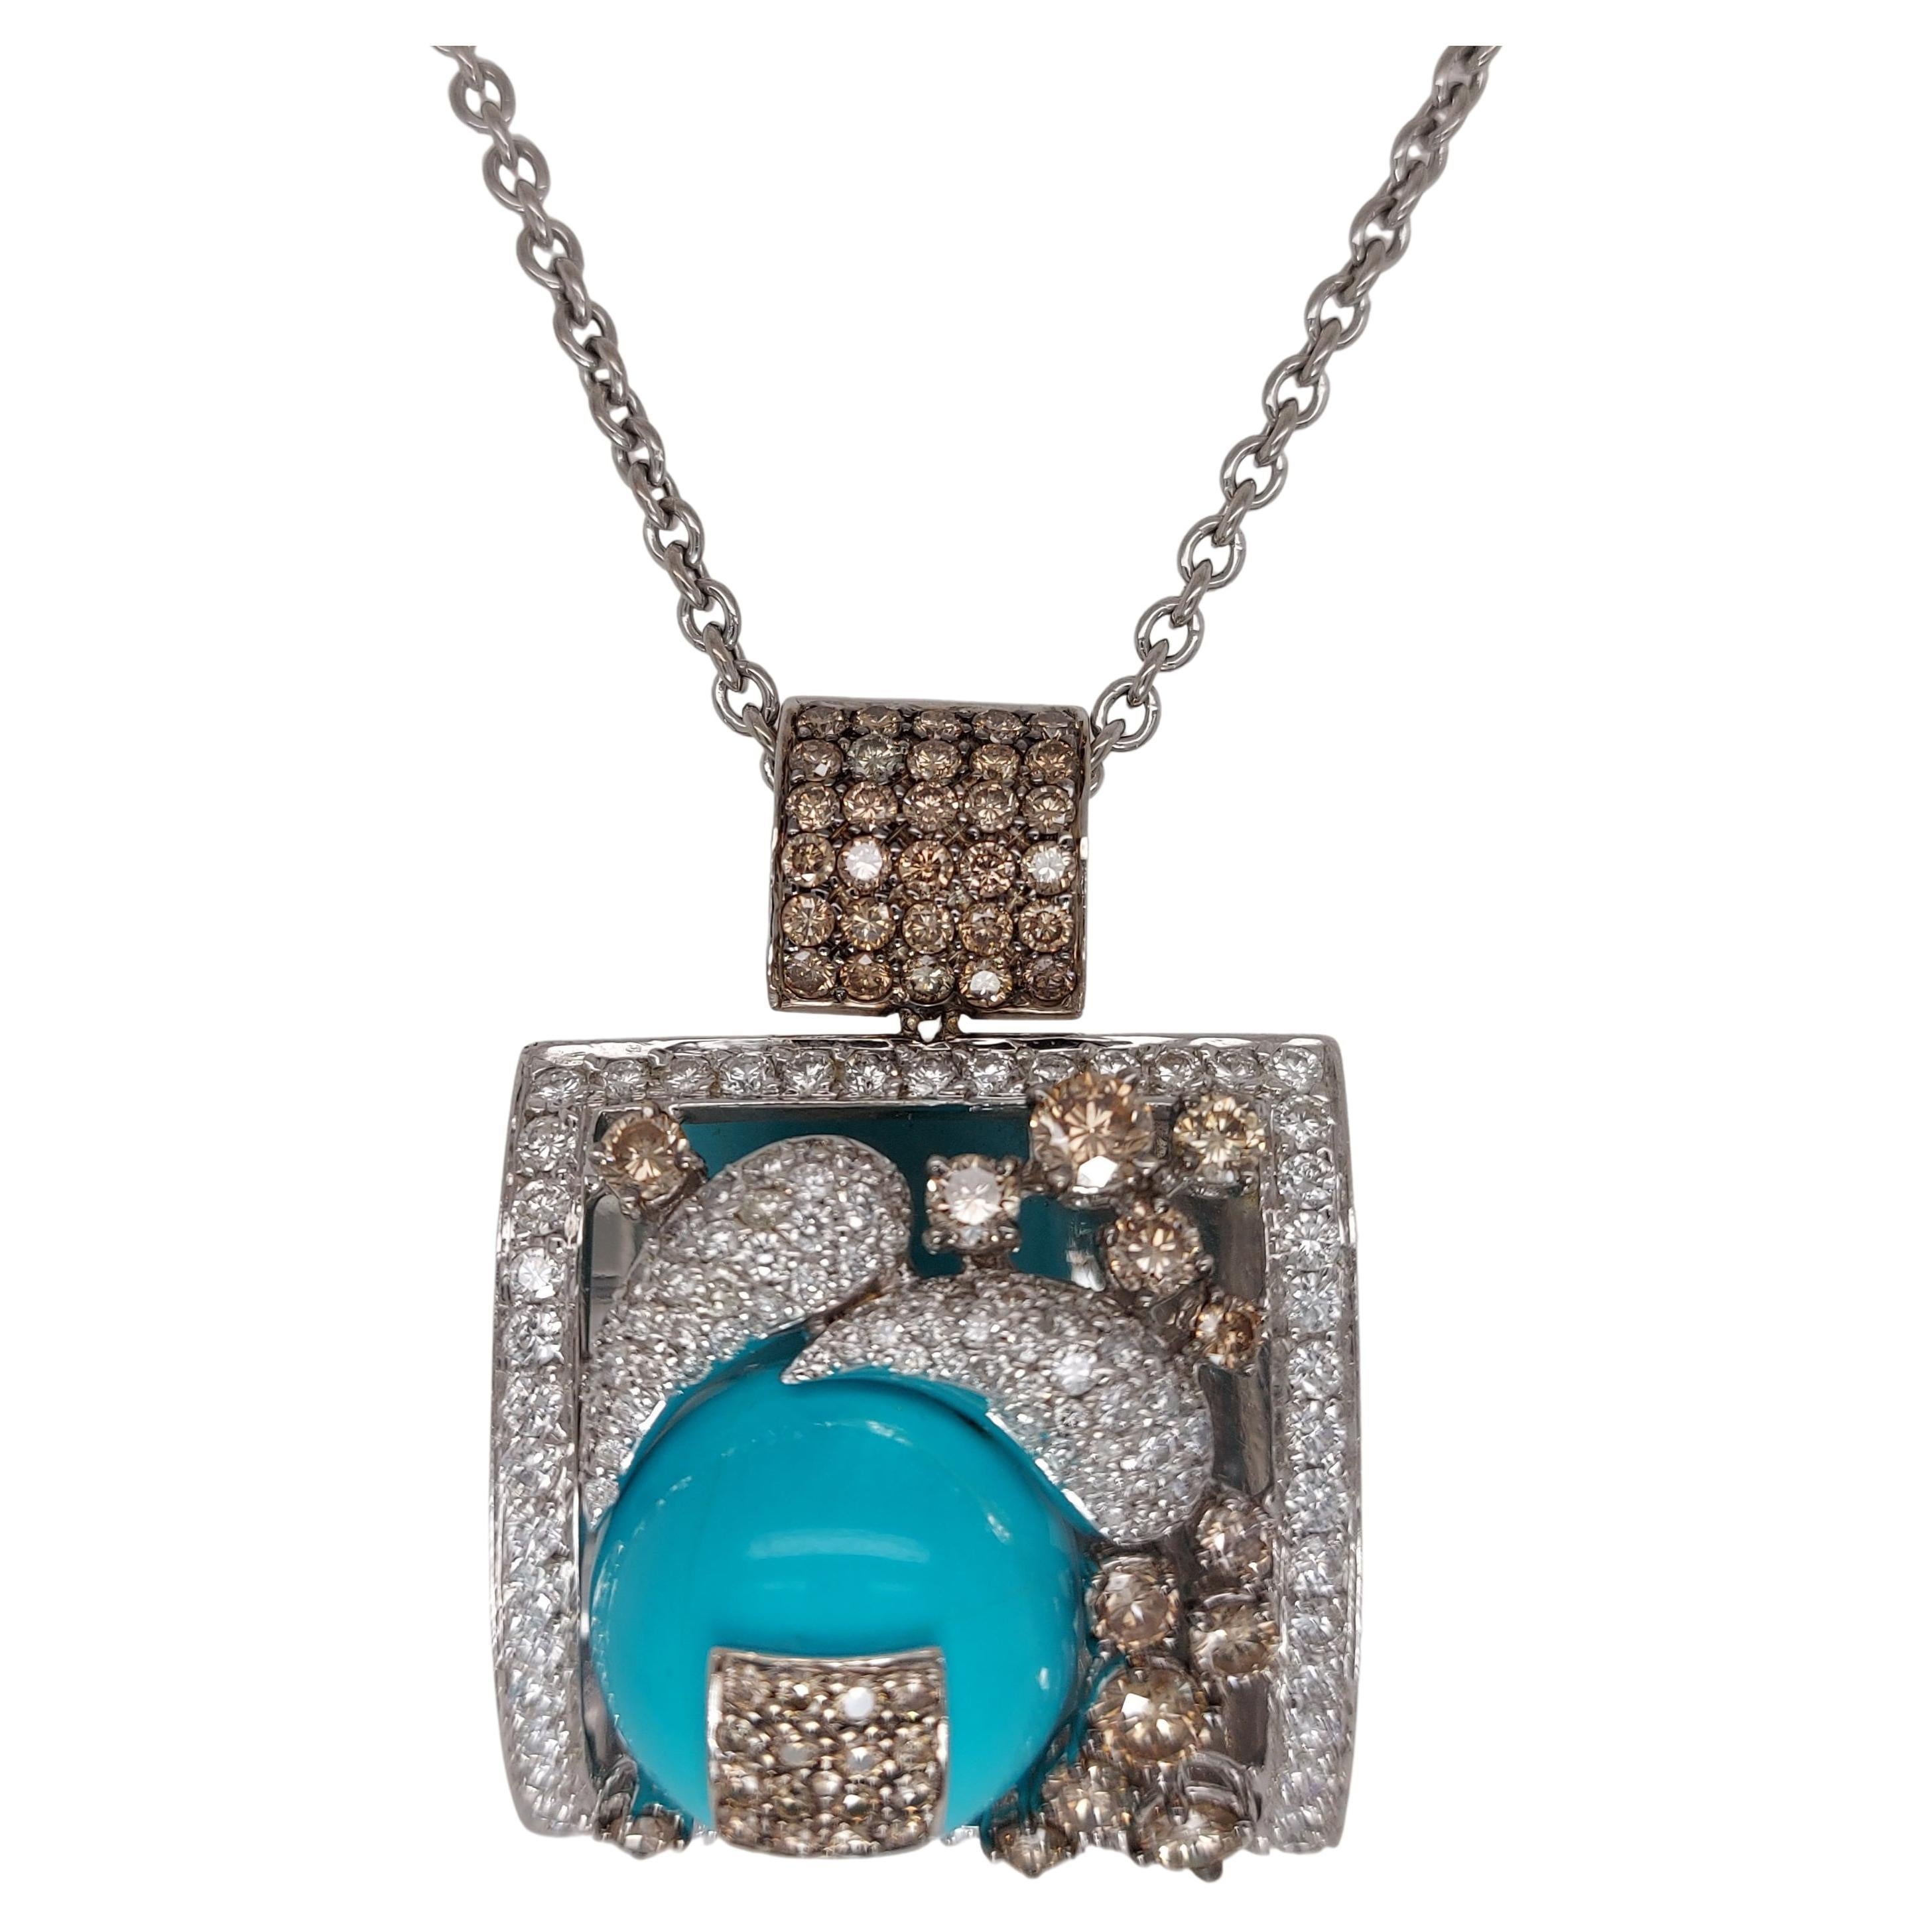 Stunning 18kt White Gold Pendant / Necklace with Turquoise and Diamonds